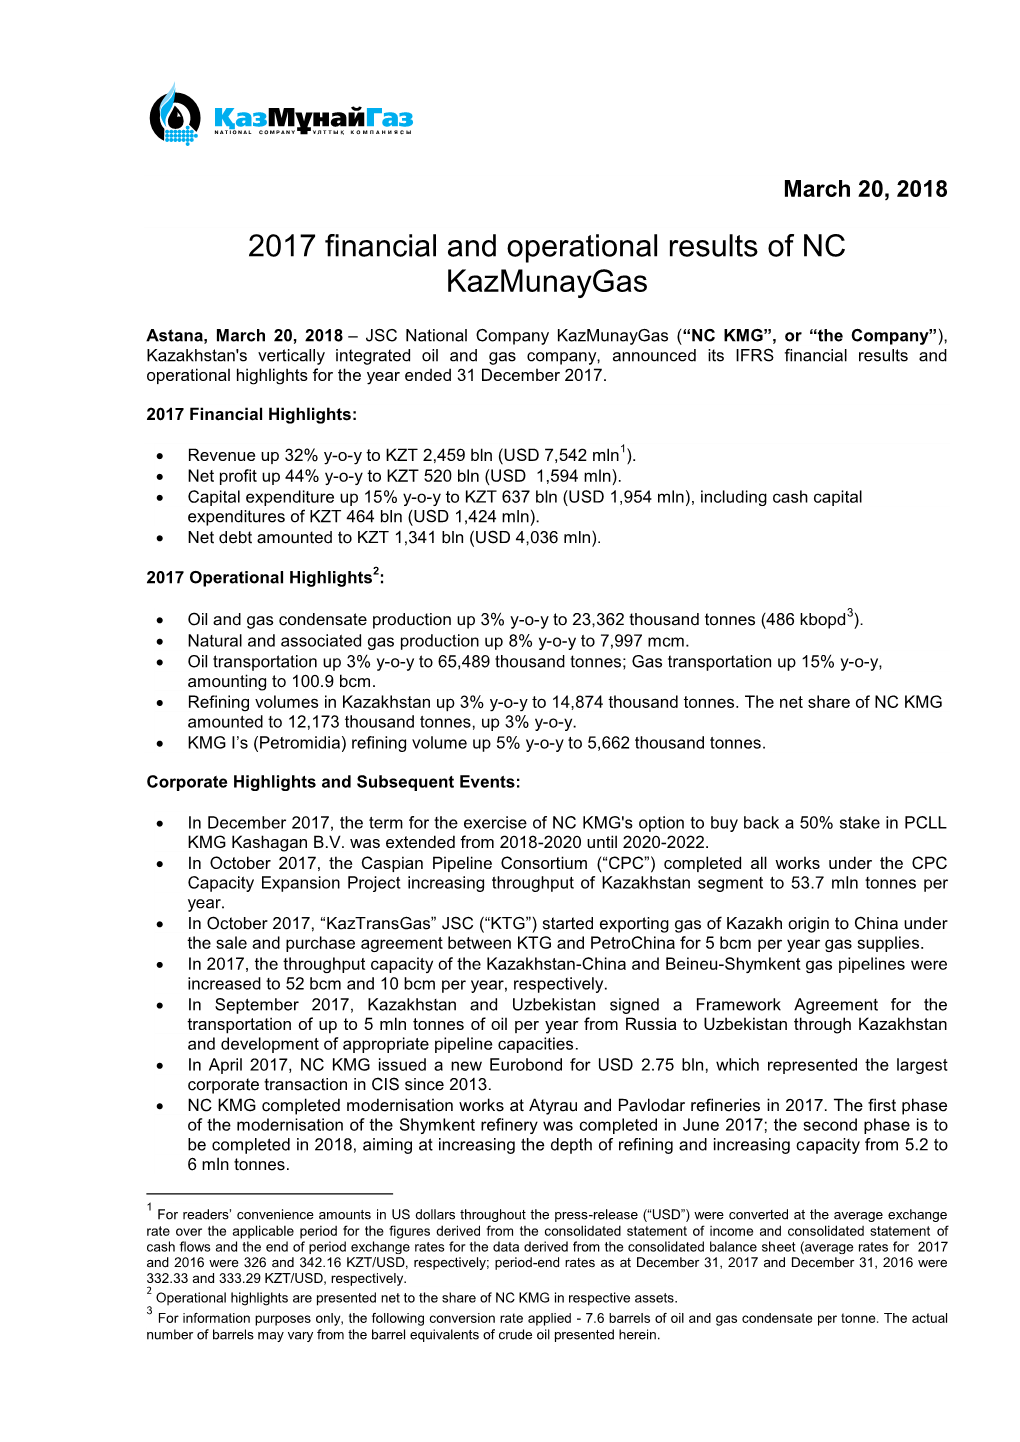 2017 Financial and Operational Results of NC Kazmunaygas